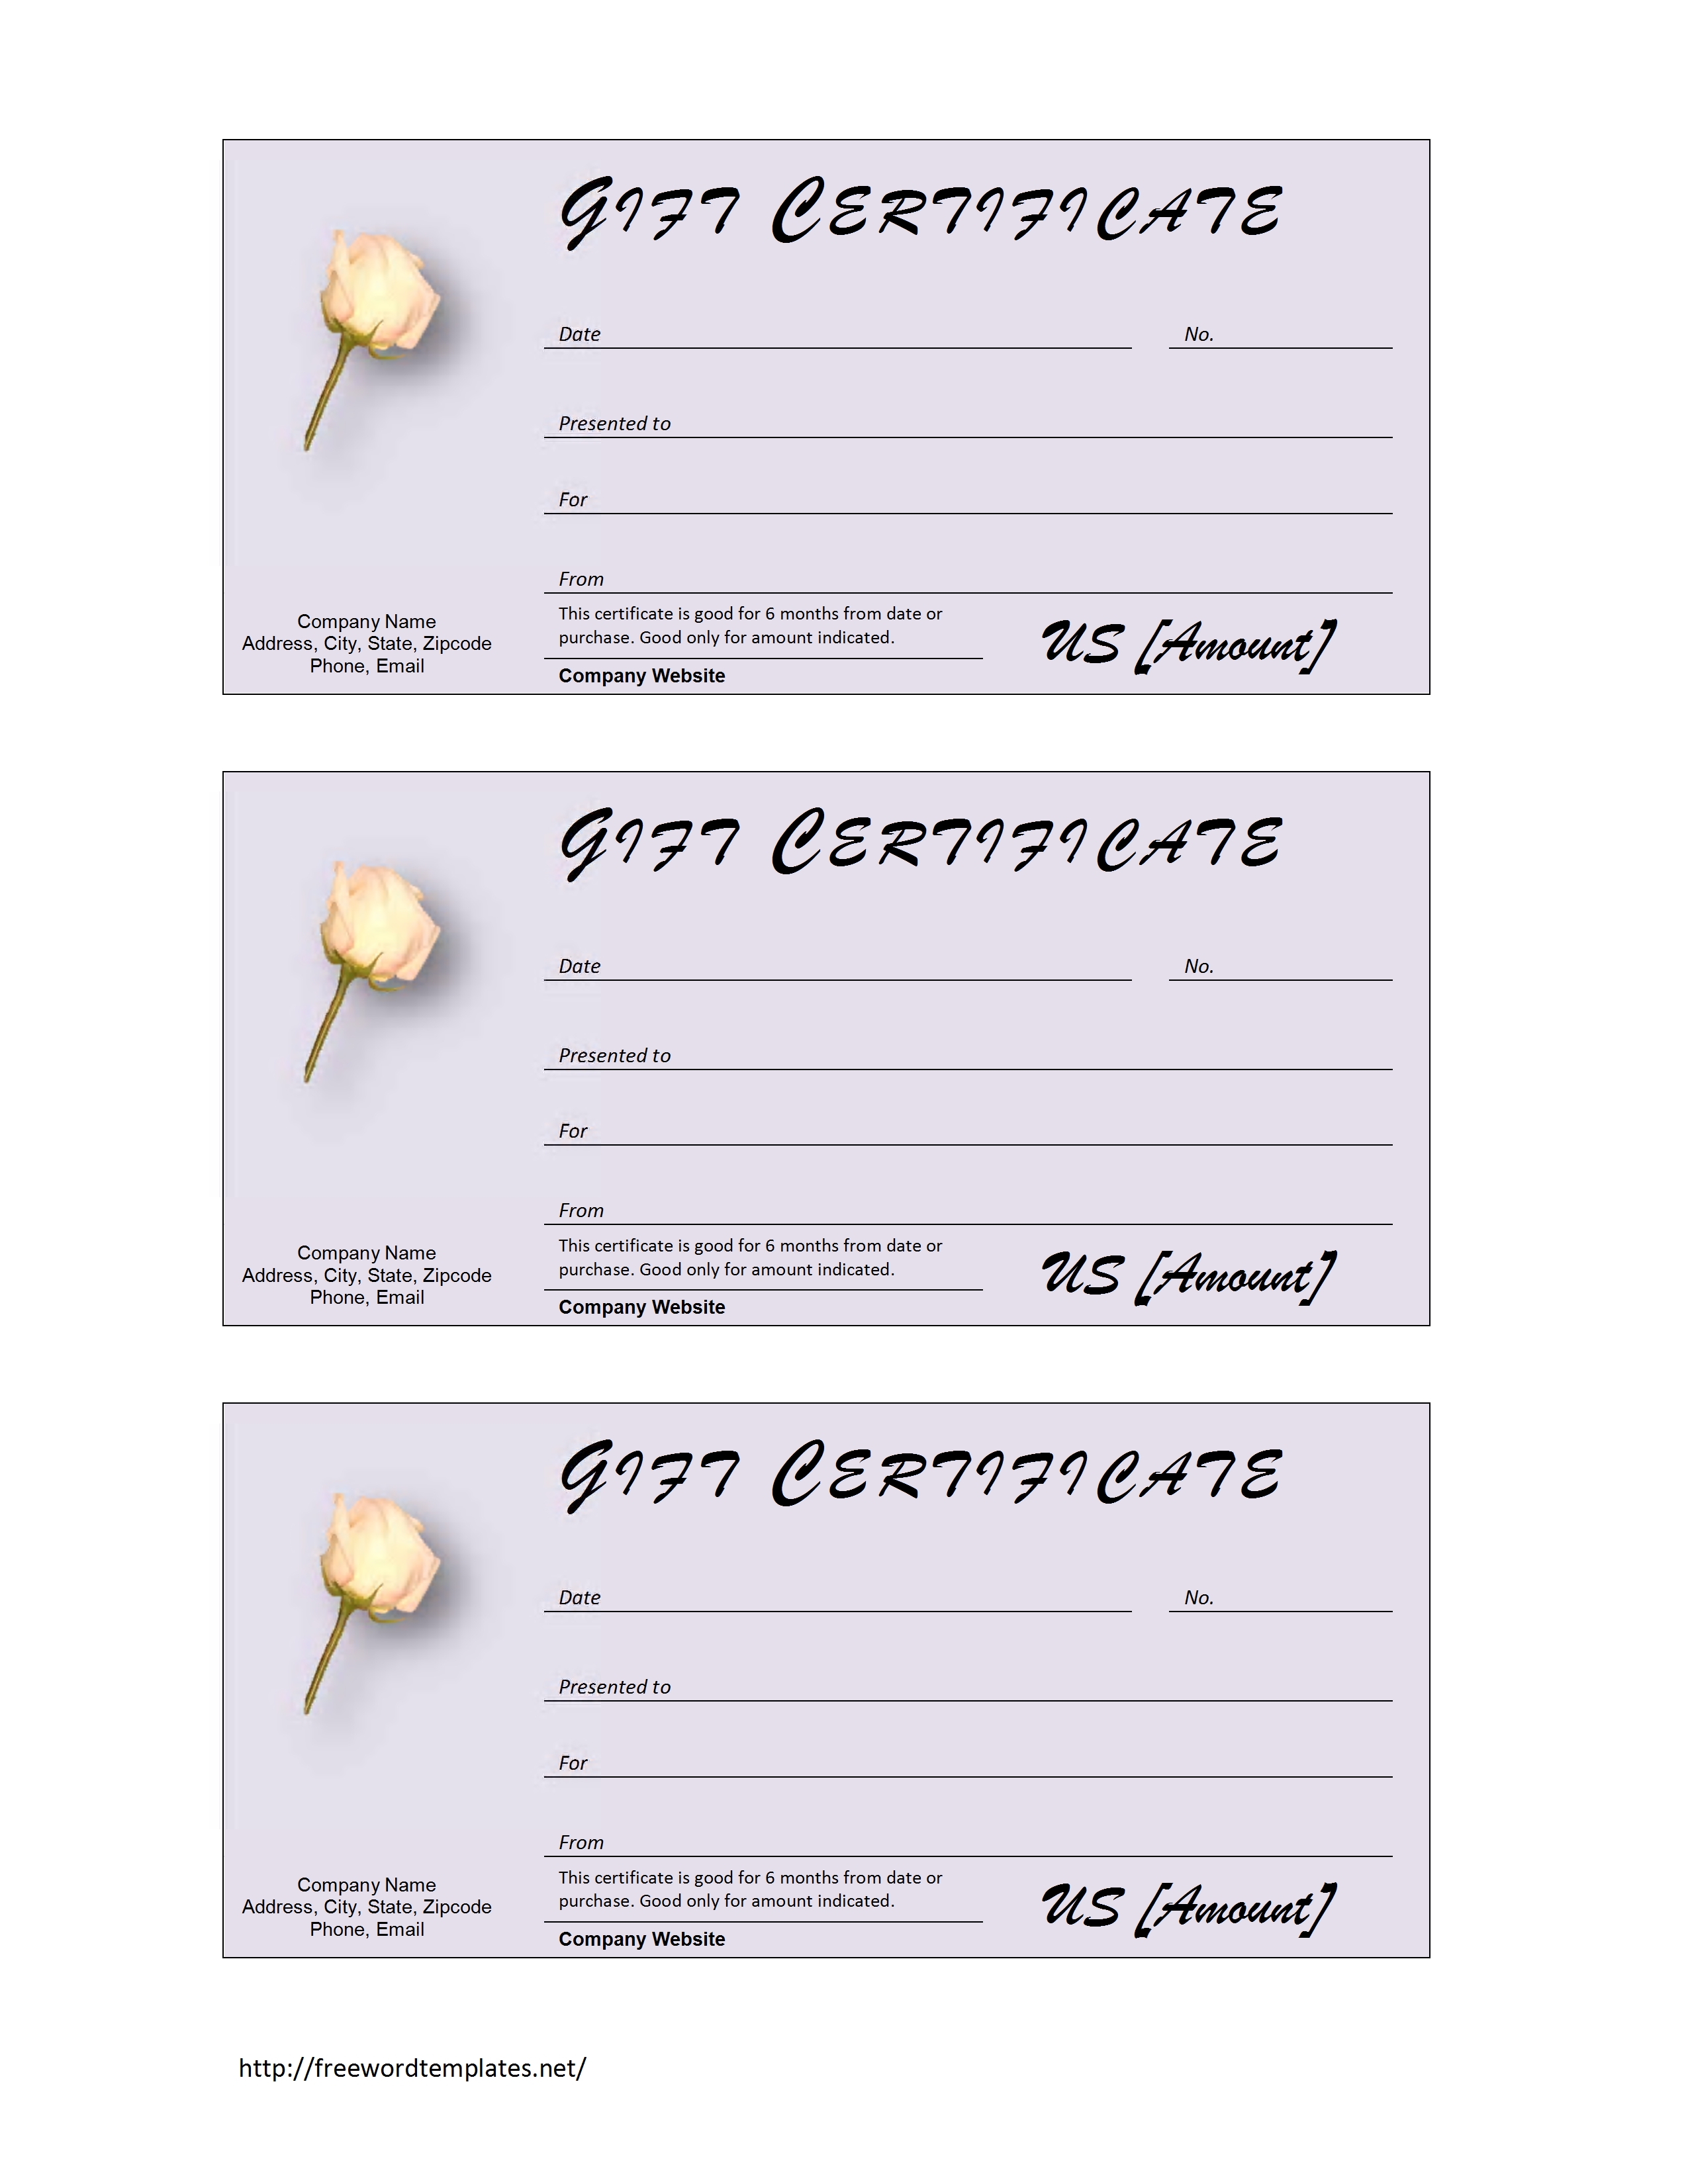 donation-gift-certificate-template